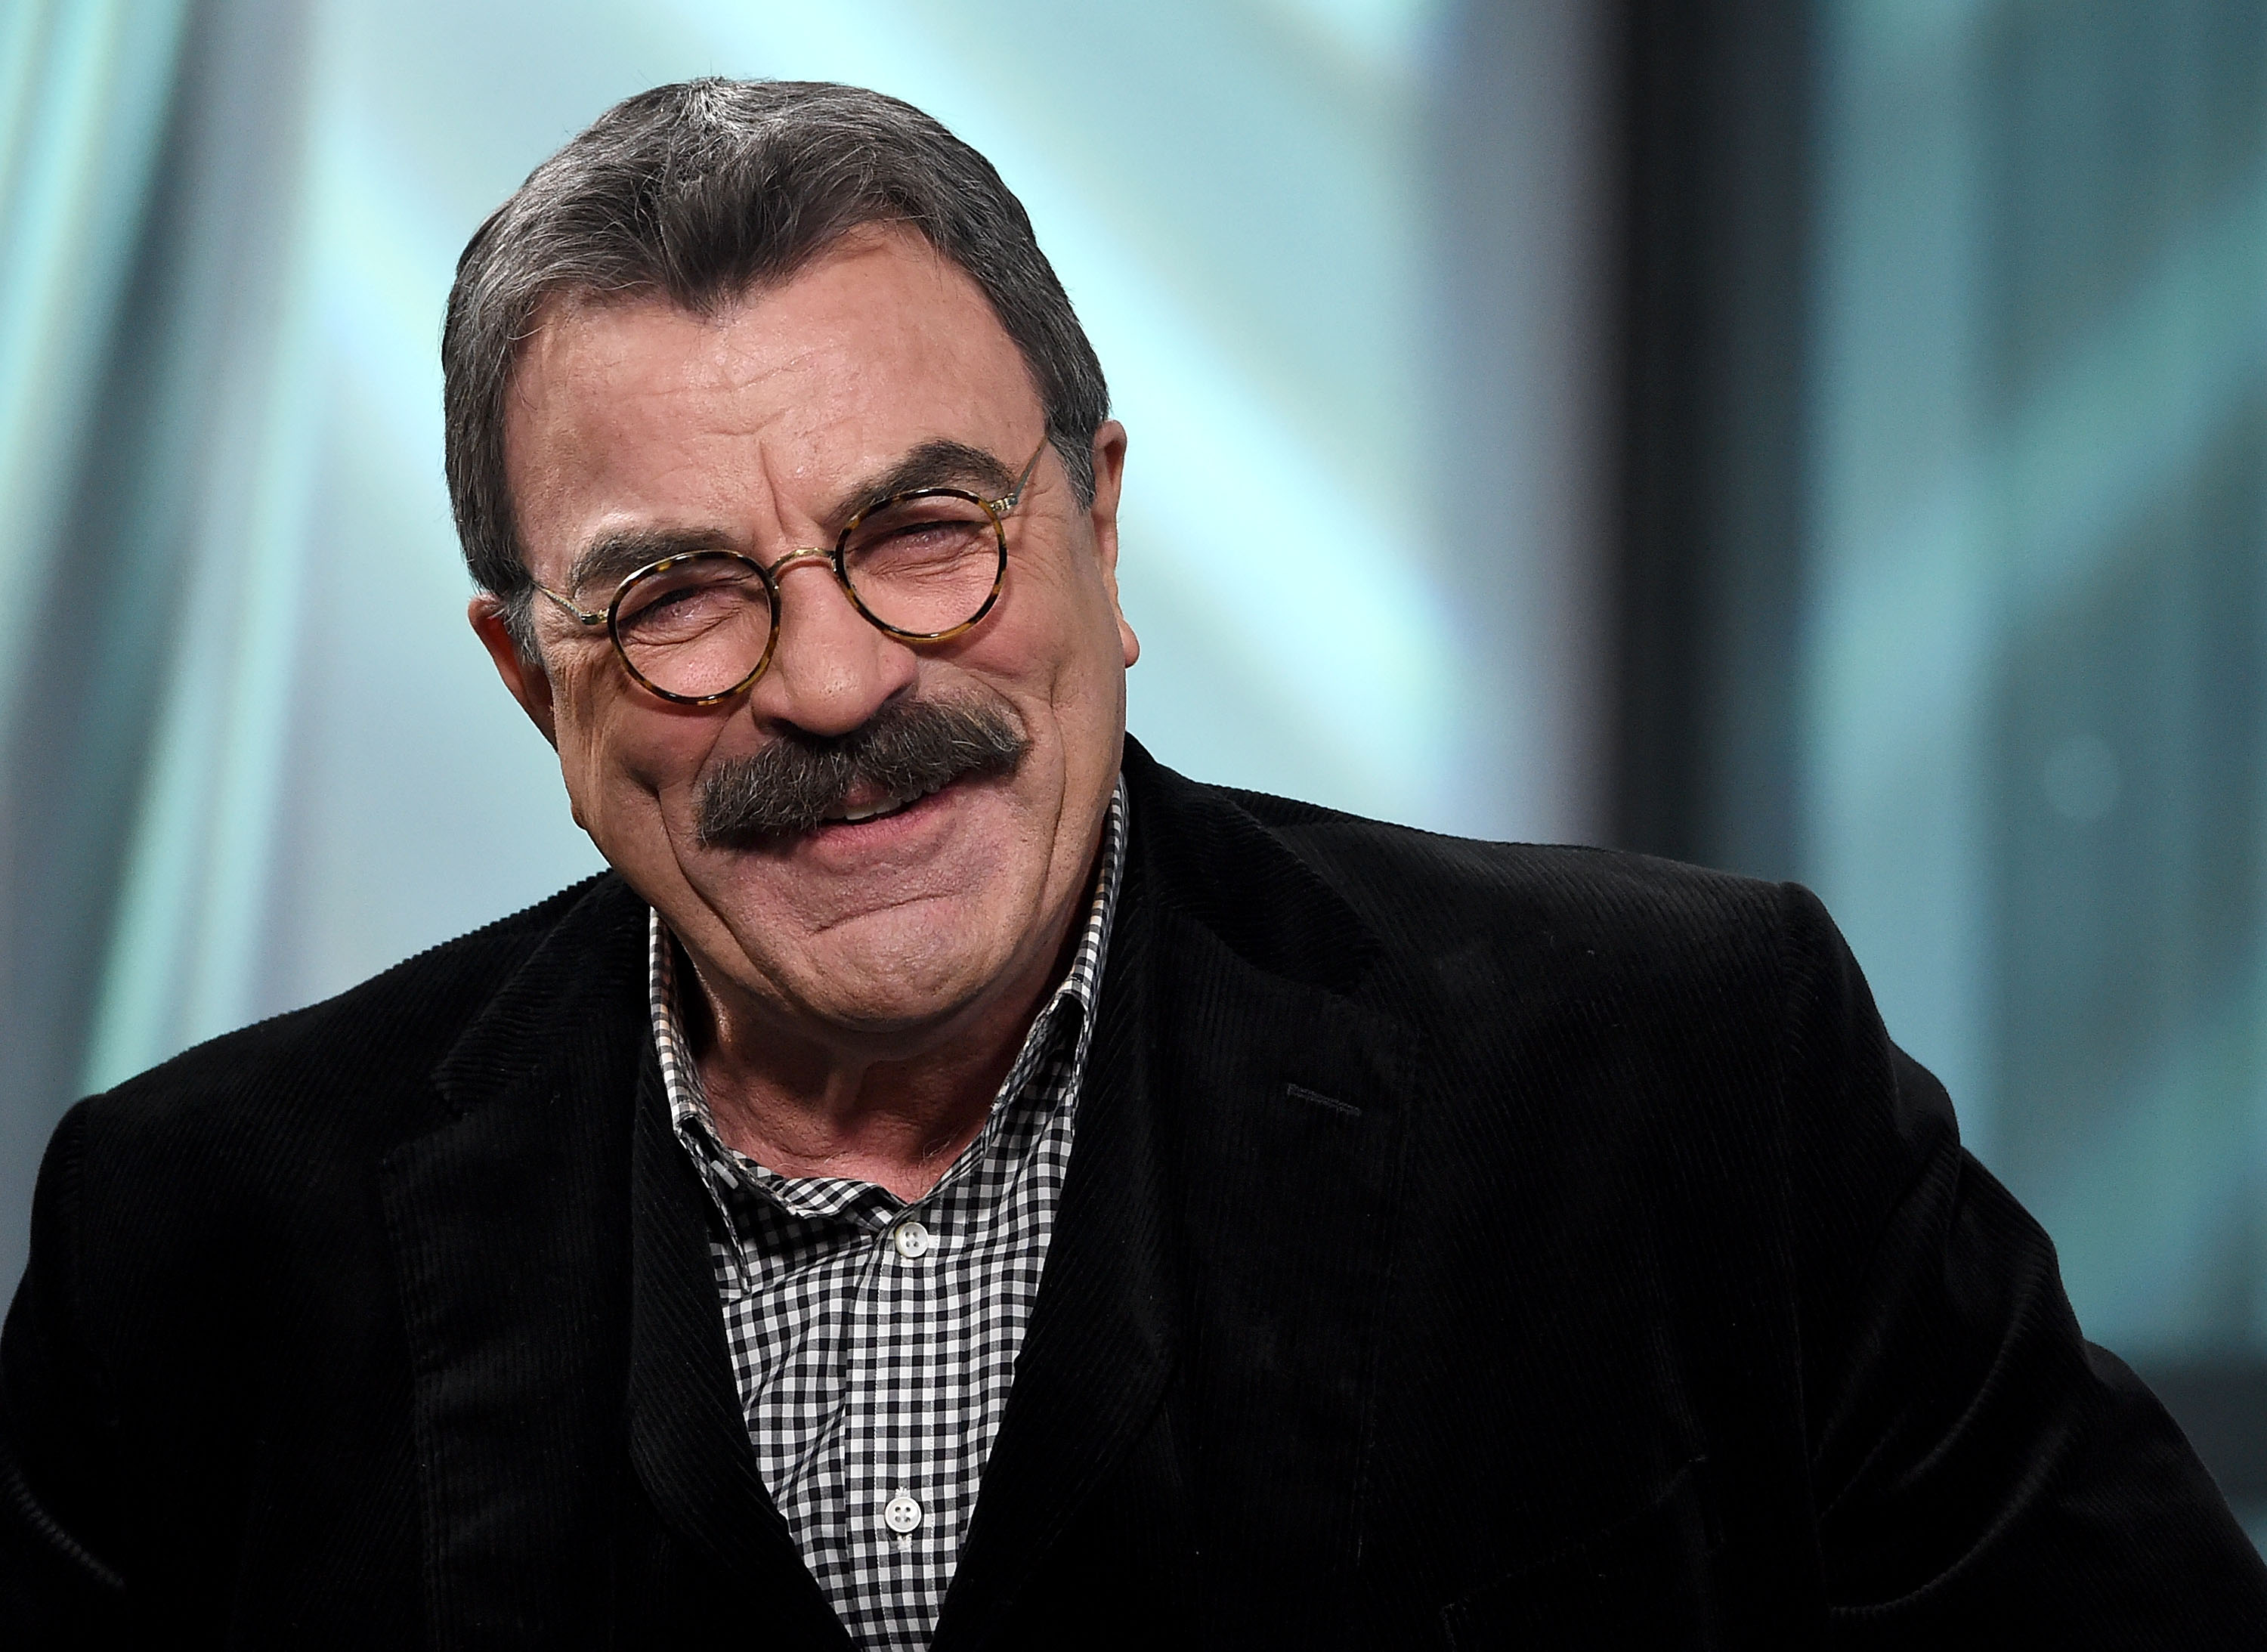 Tom Selleck discussing "Blue Bloods" at Build Studio in New York in 2017 | Source: Getty Images